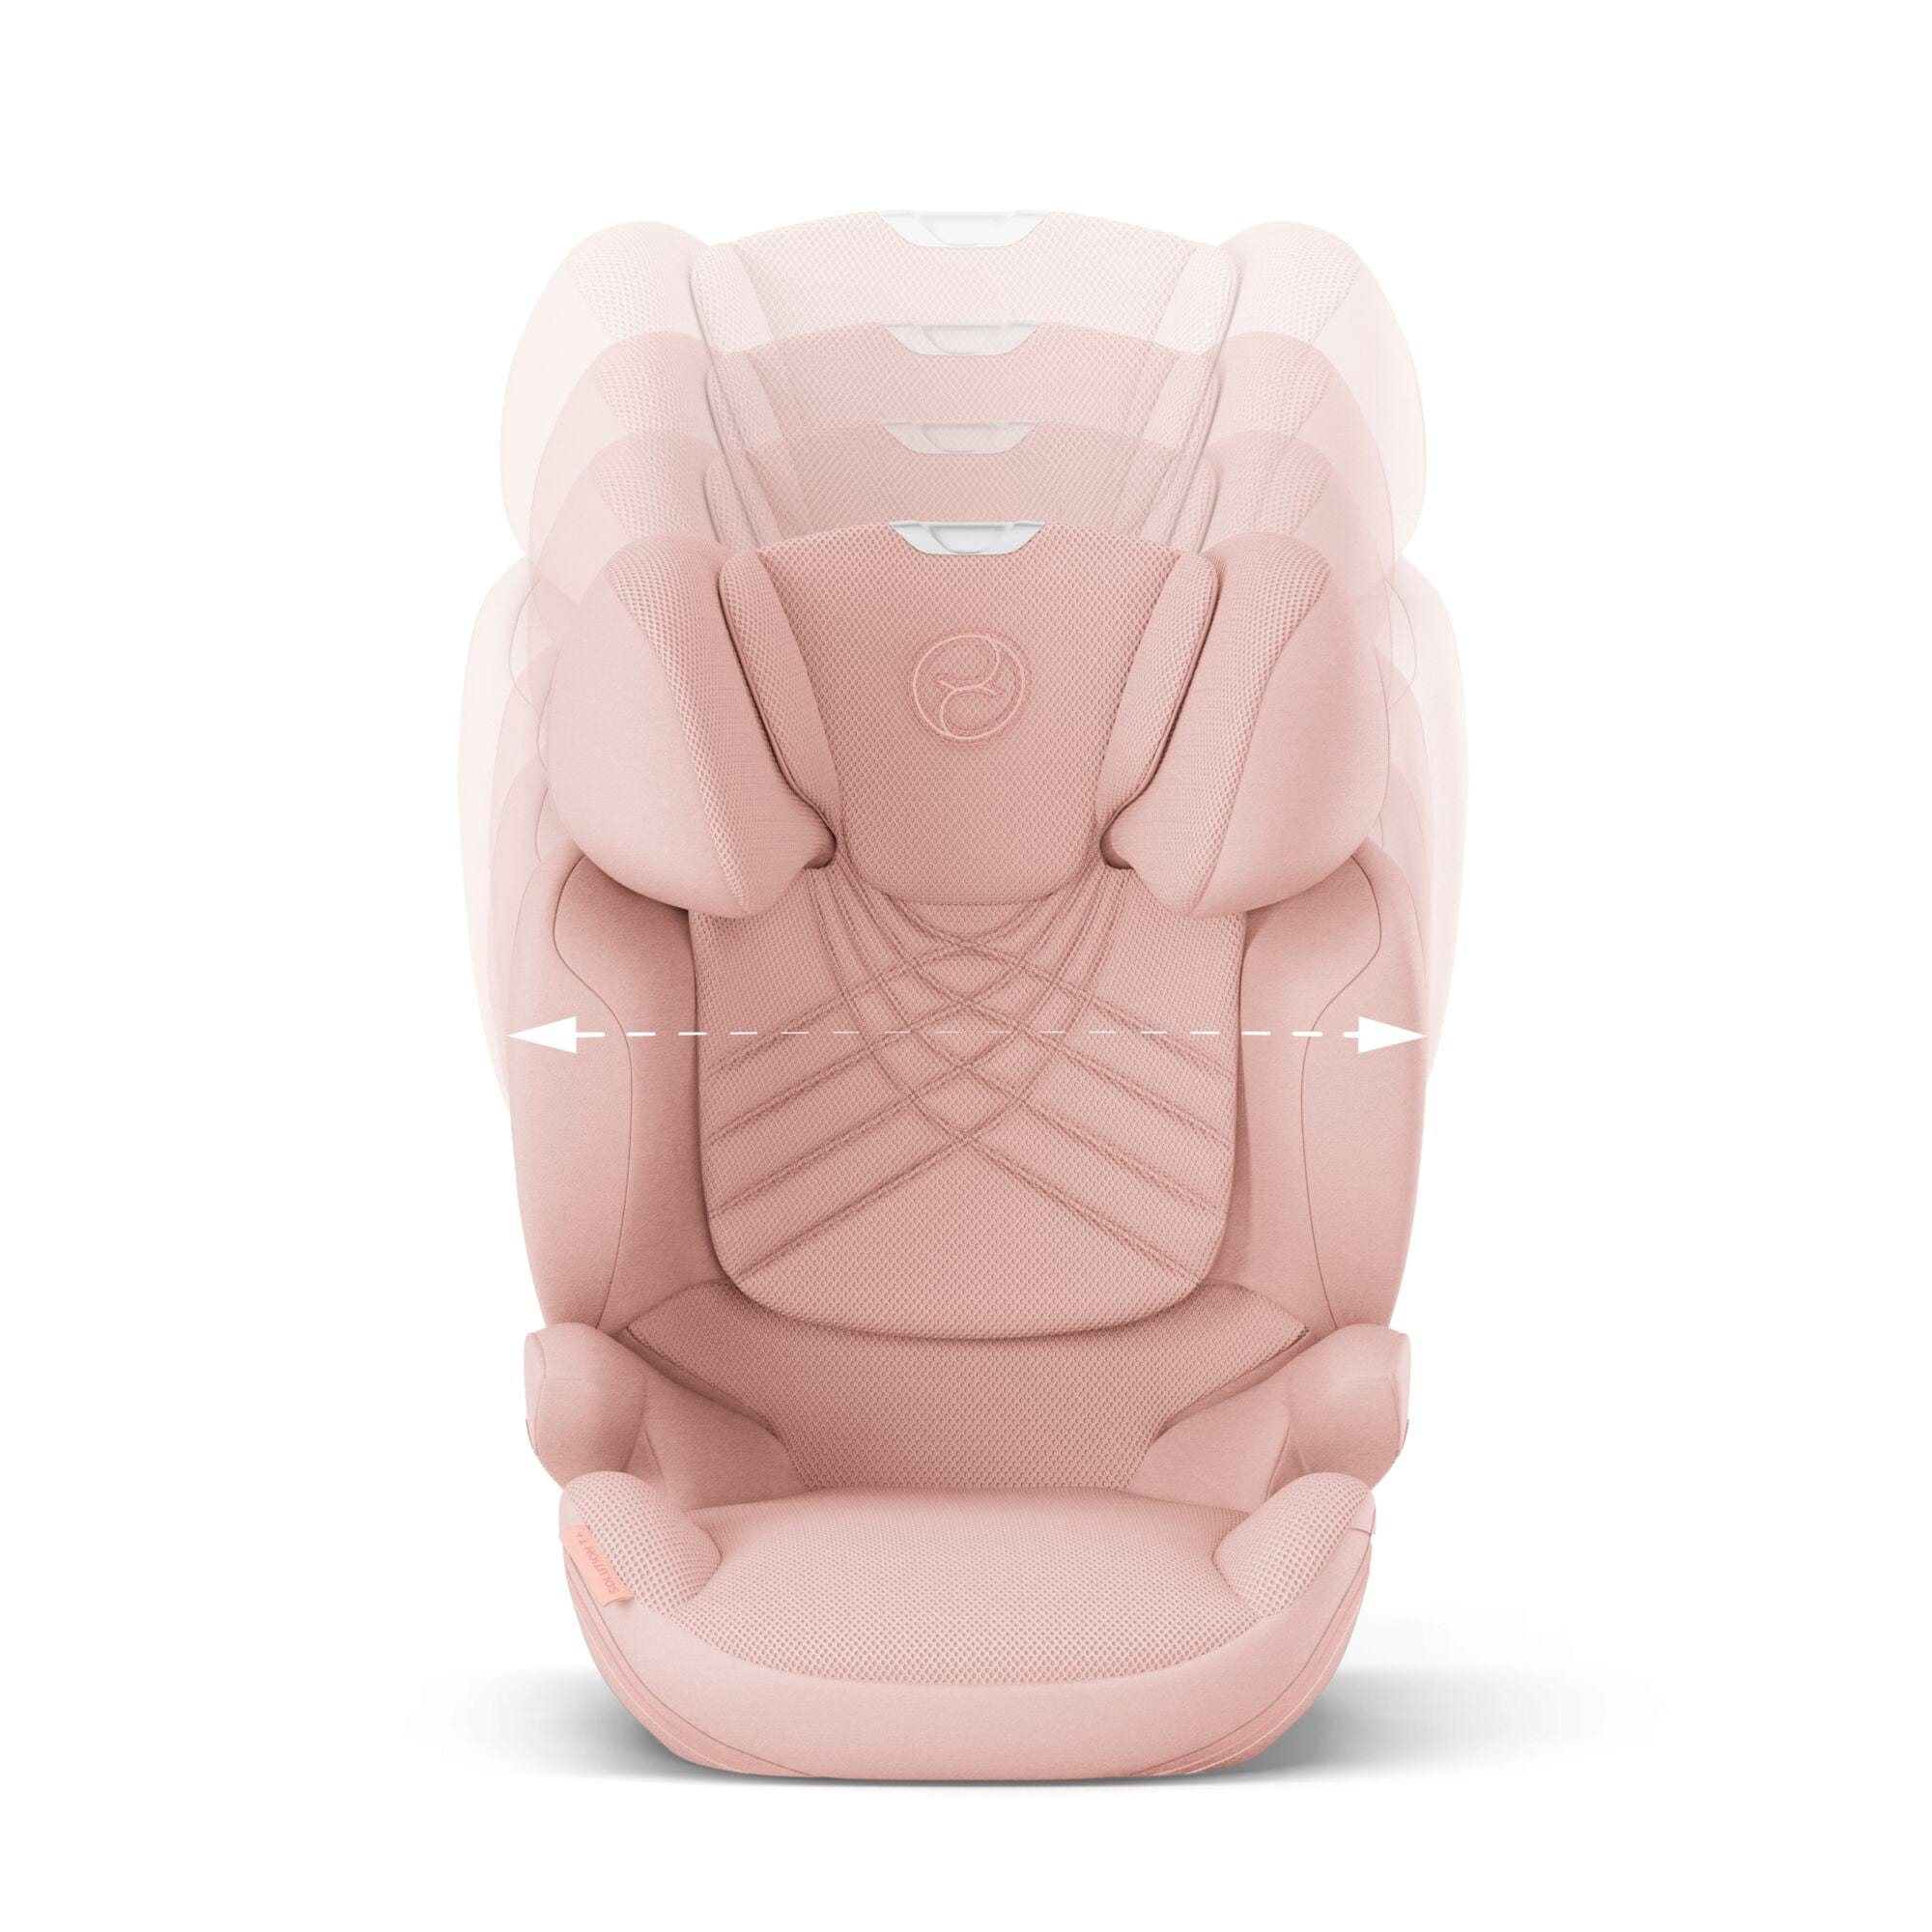 Cybex Solution T i-Fix Plus in Peach Pink Highback Booster Seats 522004112 4063846380350